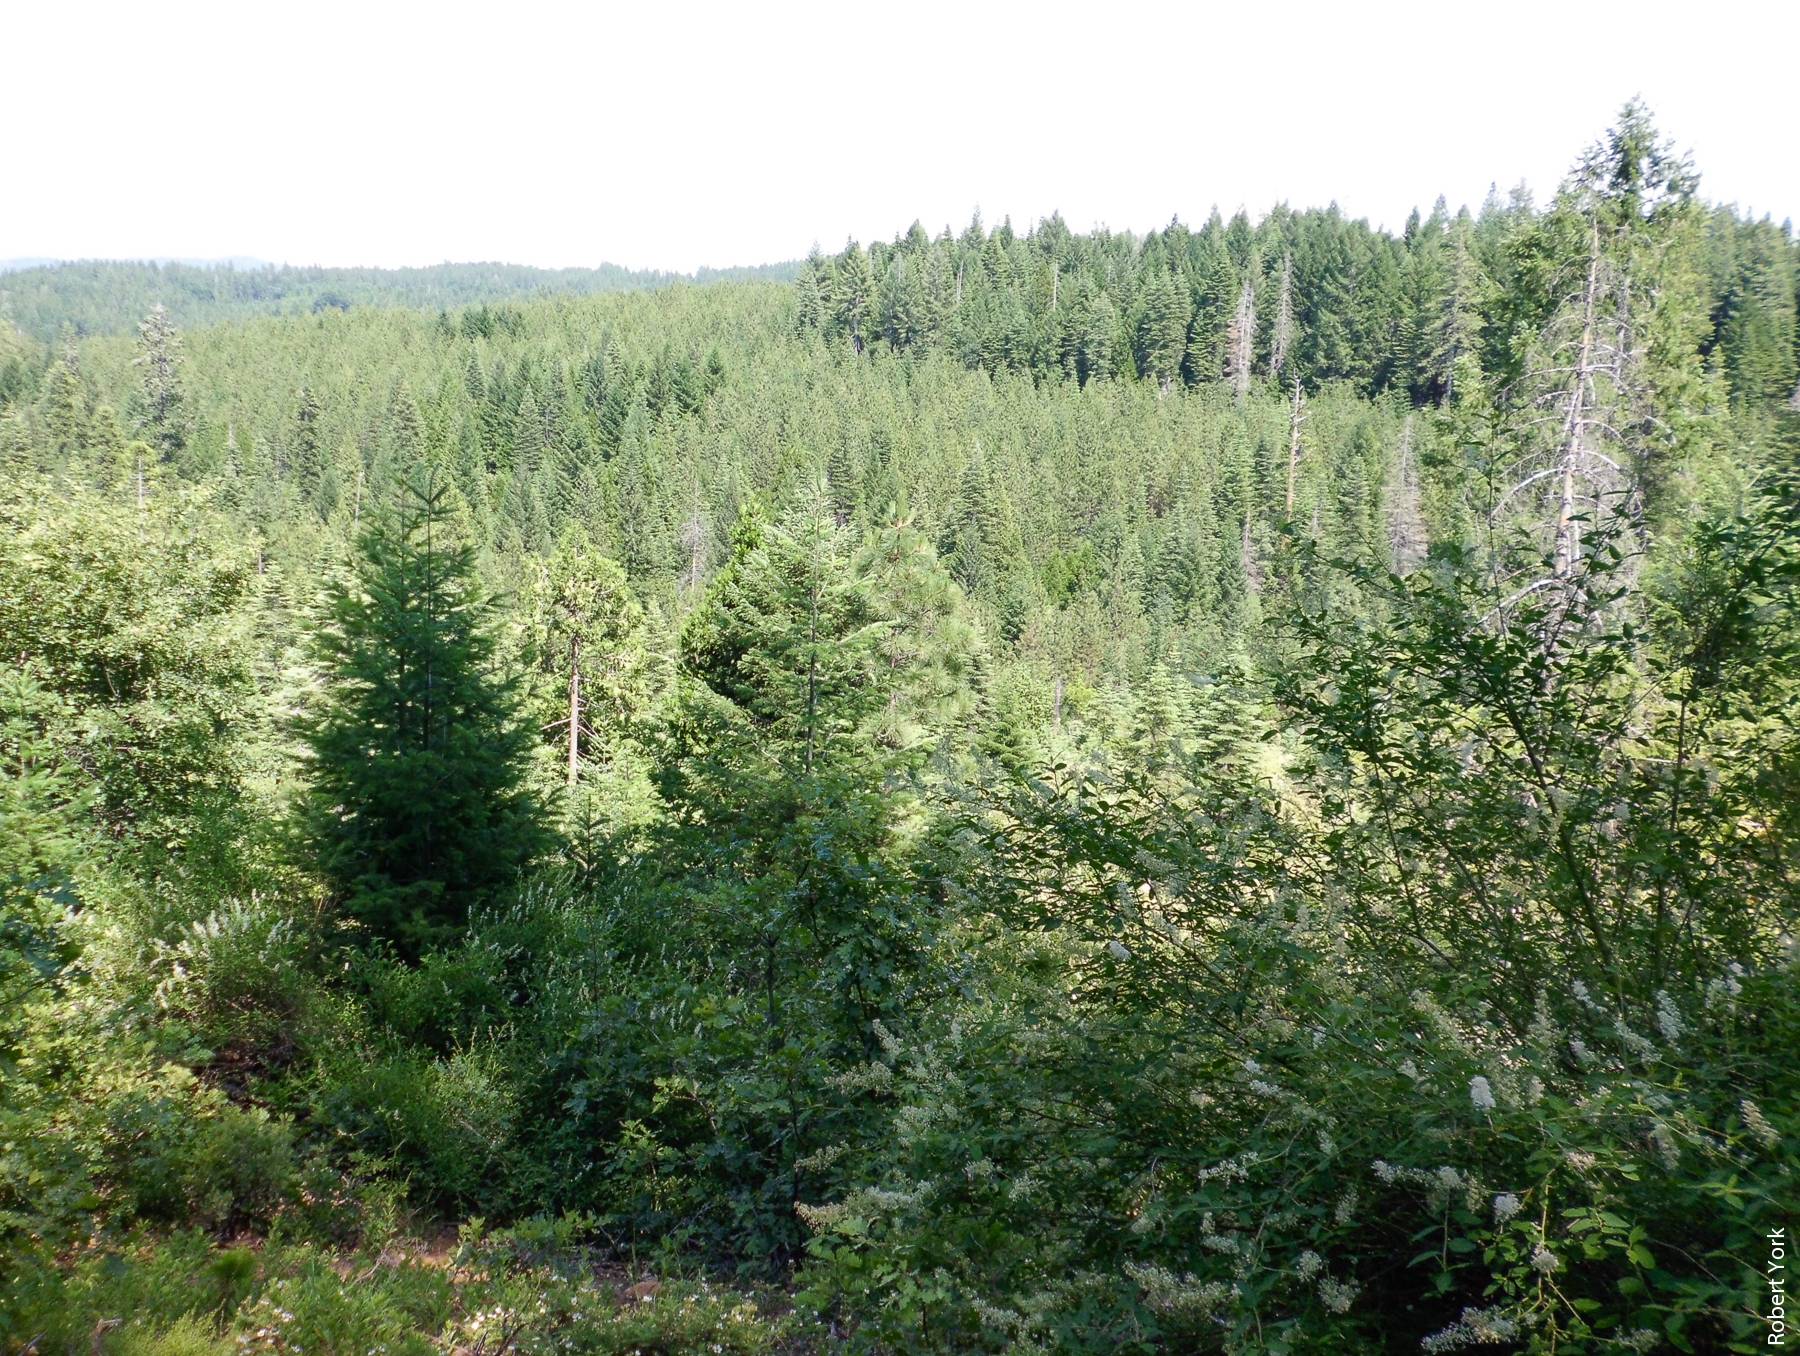 UC researchers have developed a tool that helps users understand how forest management options will affect carbon sequestration. Above, managed stands of mixed-conifer forest in the Sierra Nevada.